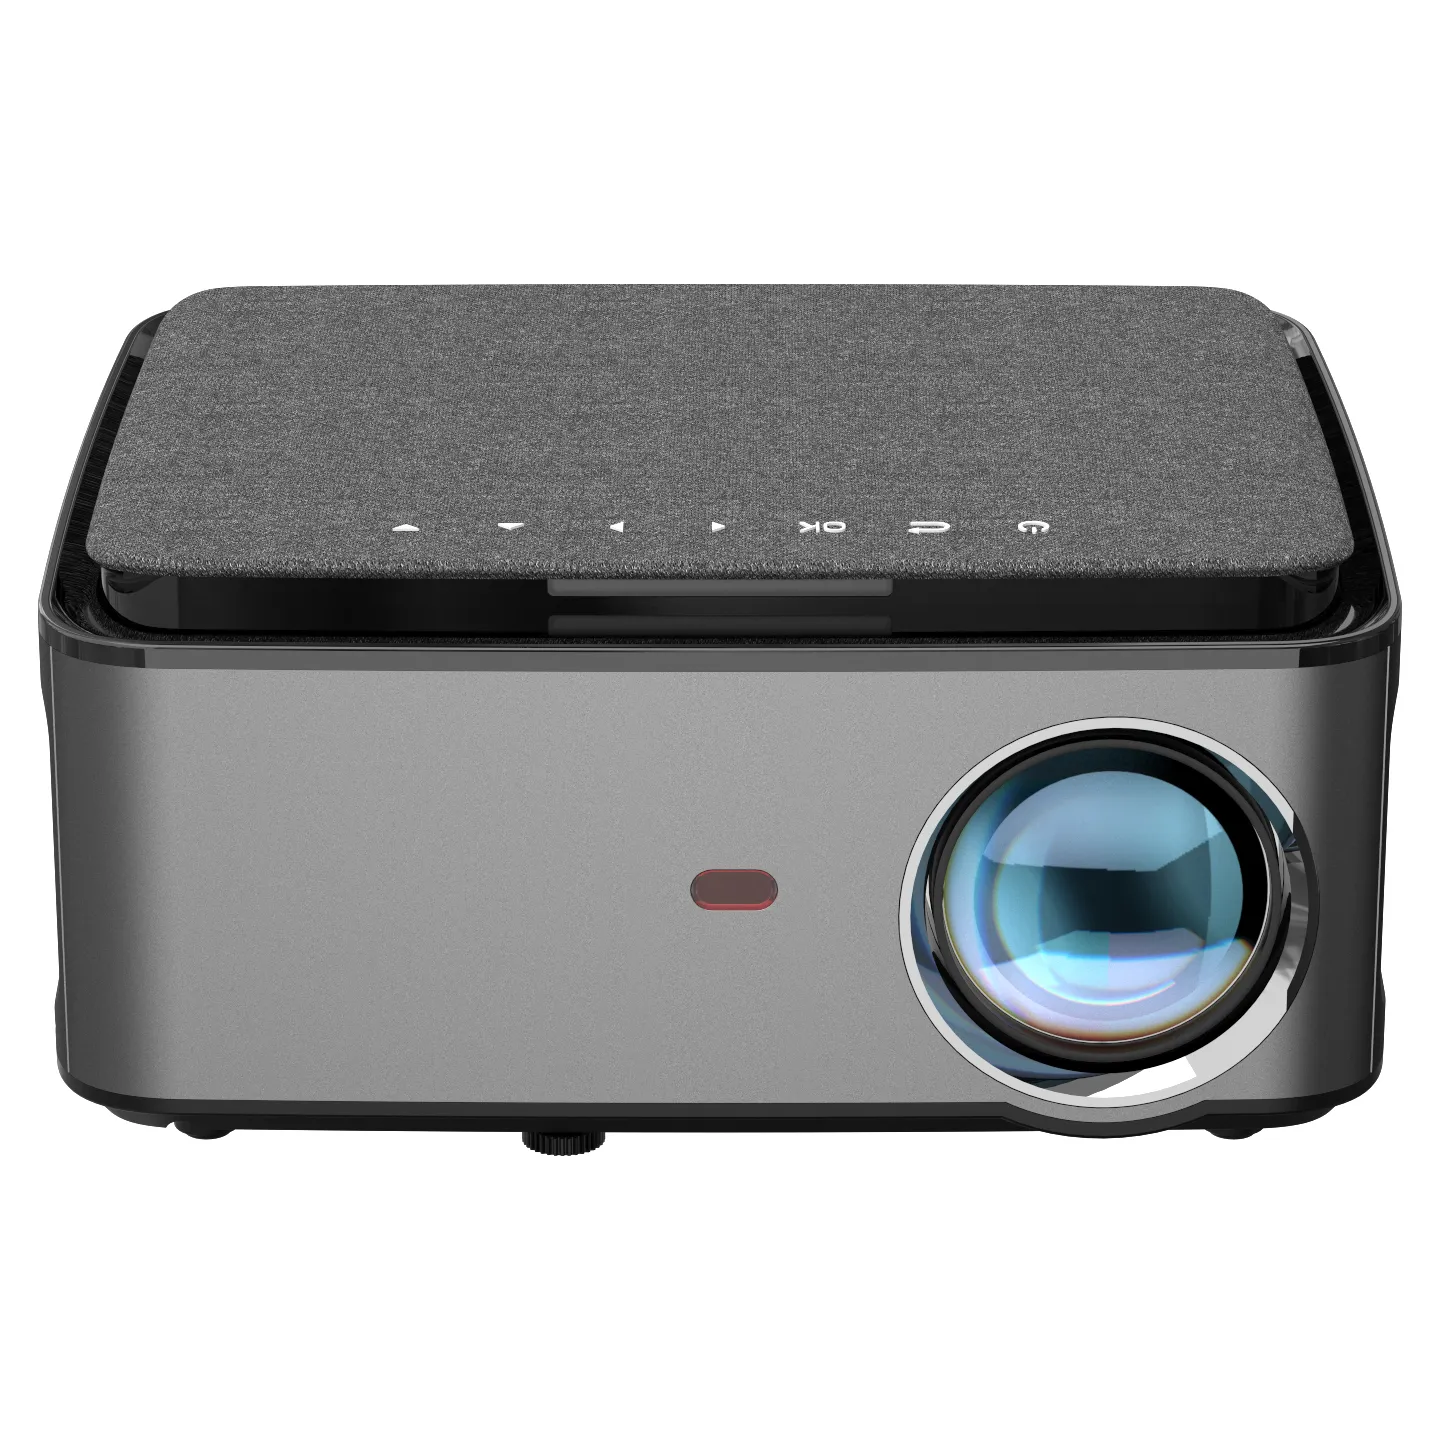 Vgke T28 Led Video Projector 1920P Draagbare Optioneel Android Wifi Beamer Ondersteuning Full Hd 1080P Home Theater Cinema